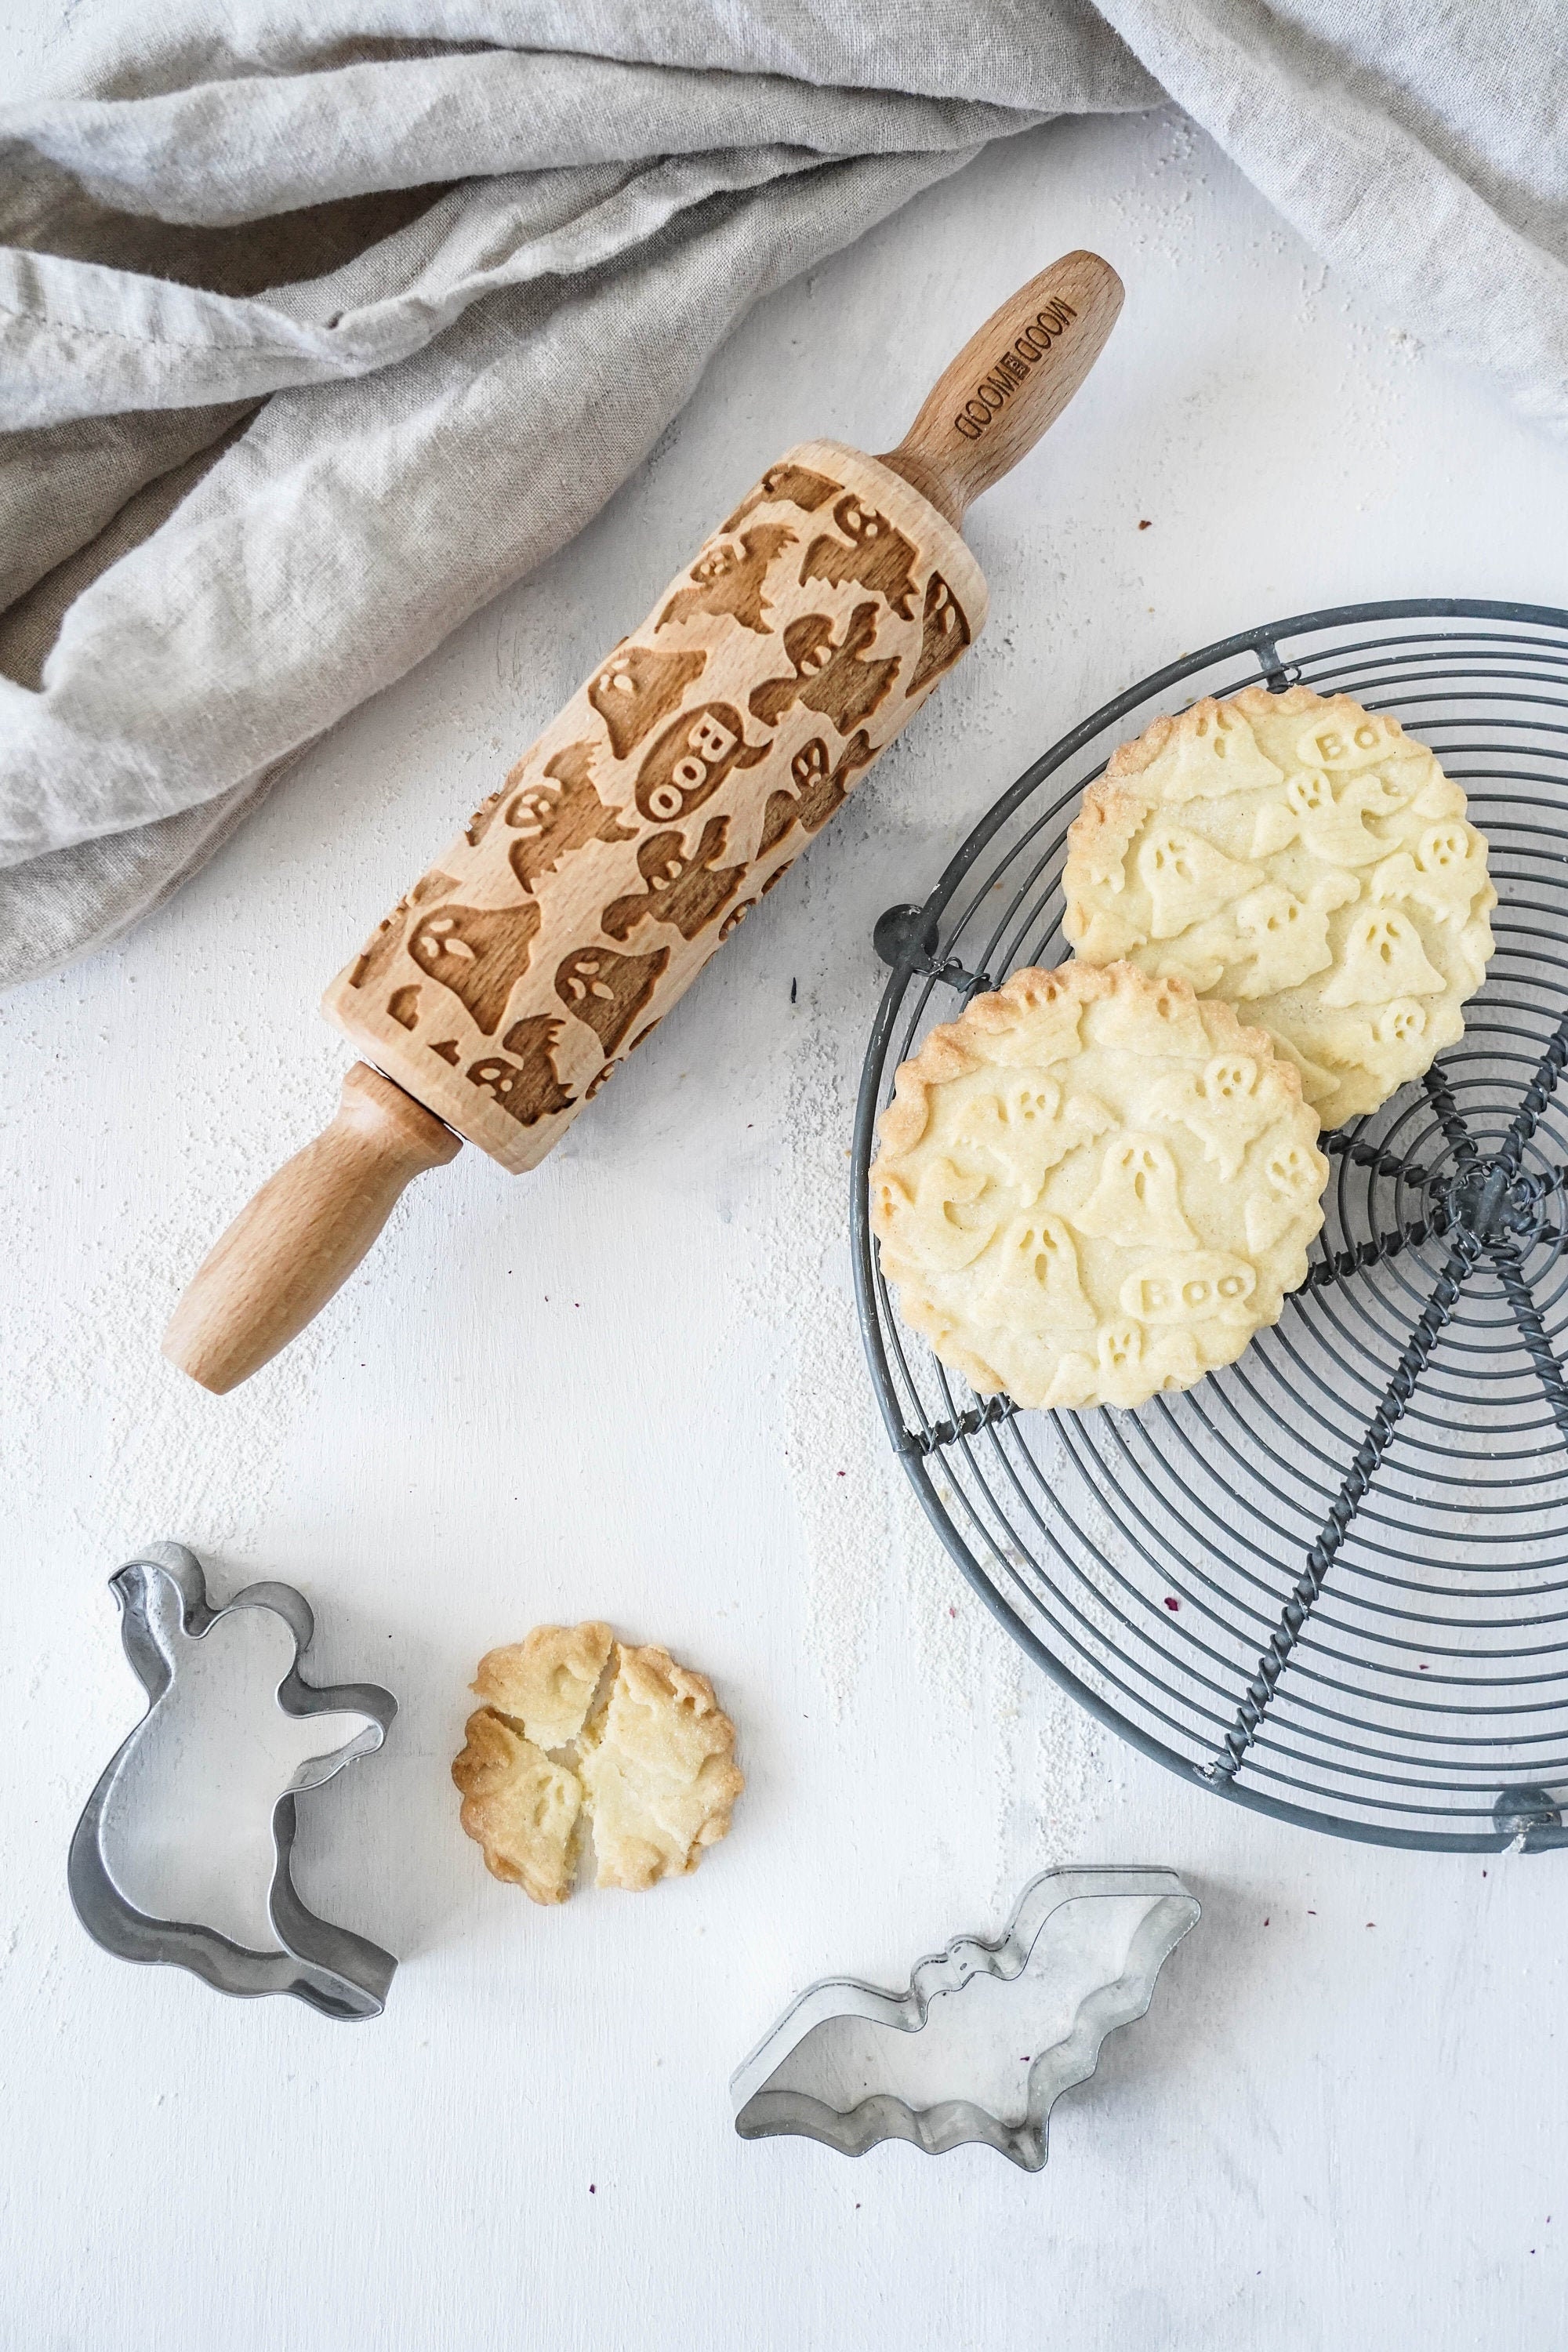 No. R300 HALLOWEEN - Rolling Pin, Embossed rolling pin